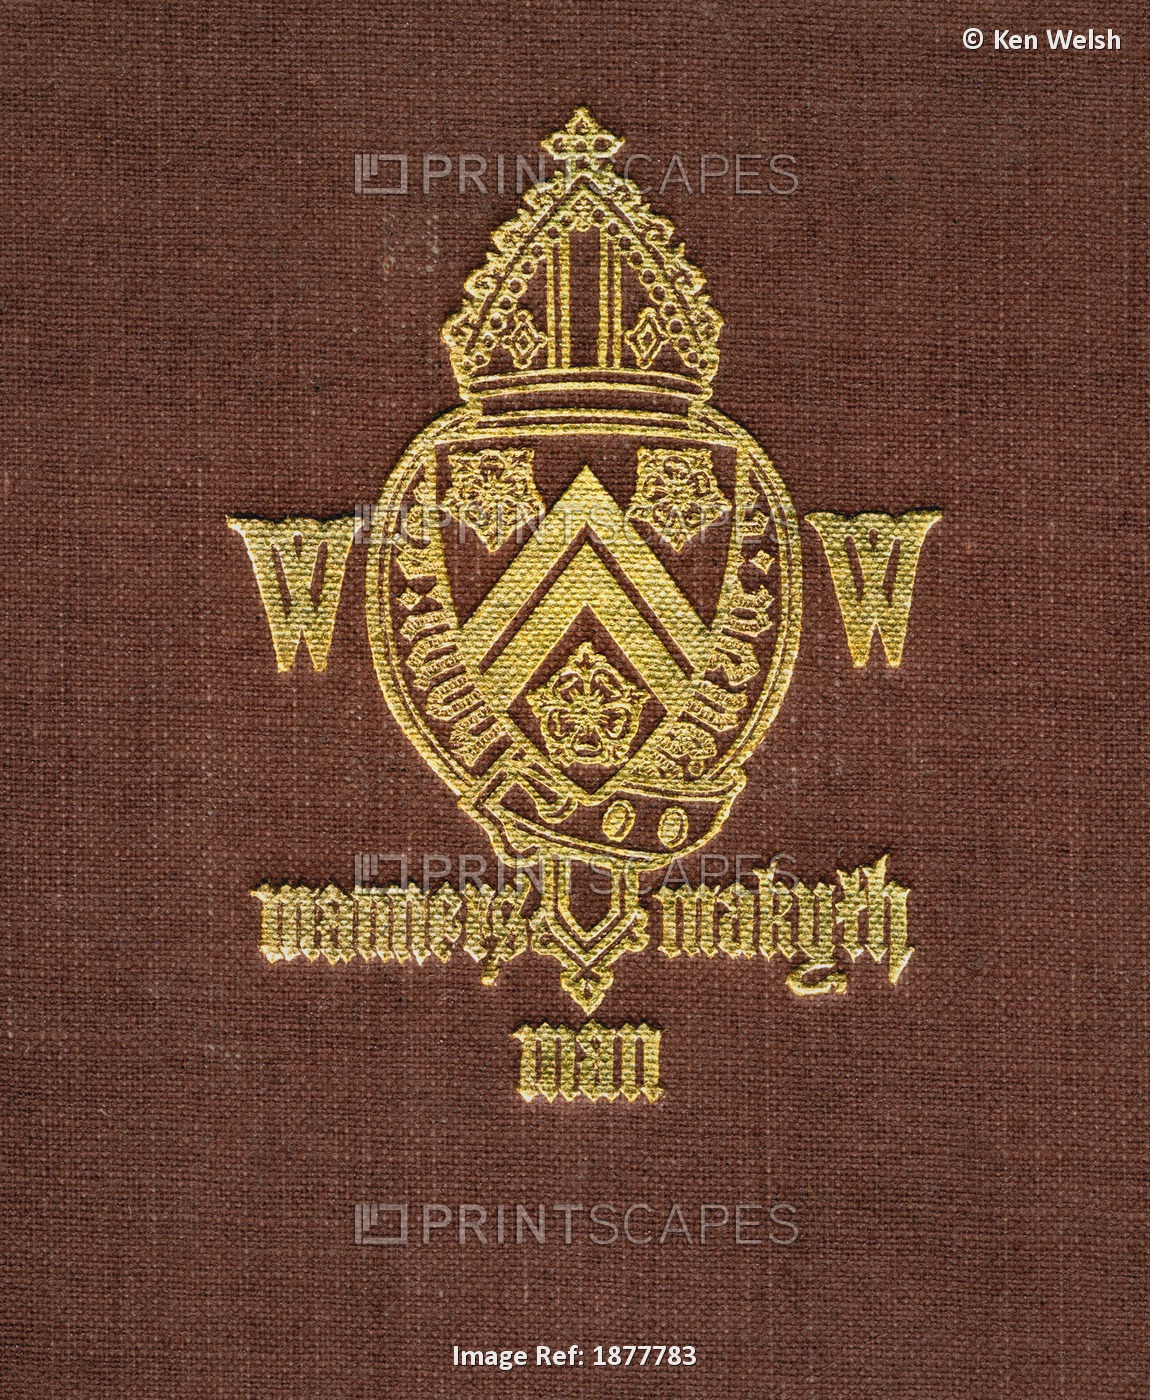 Winchester College Coat Of Arms And Motto. Manners Makyth Man. From Winchester ...